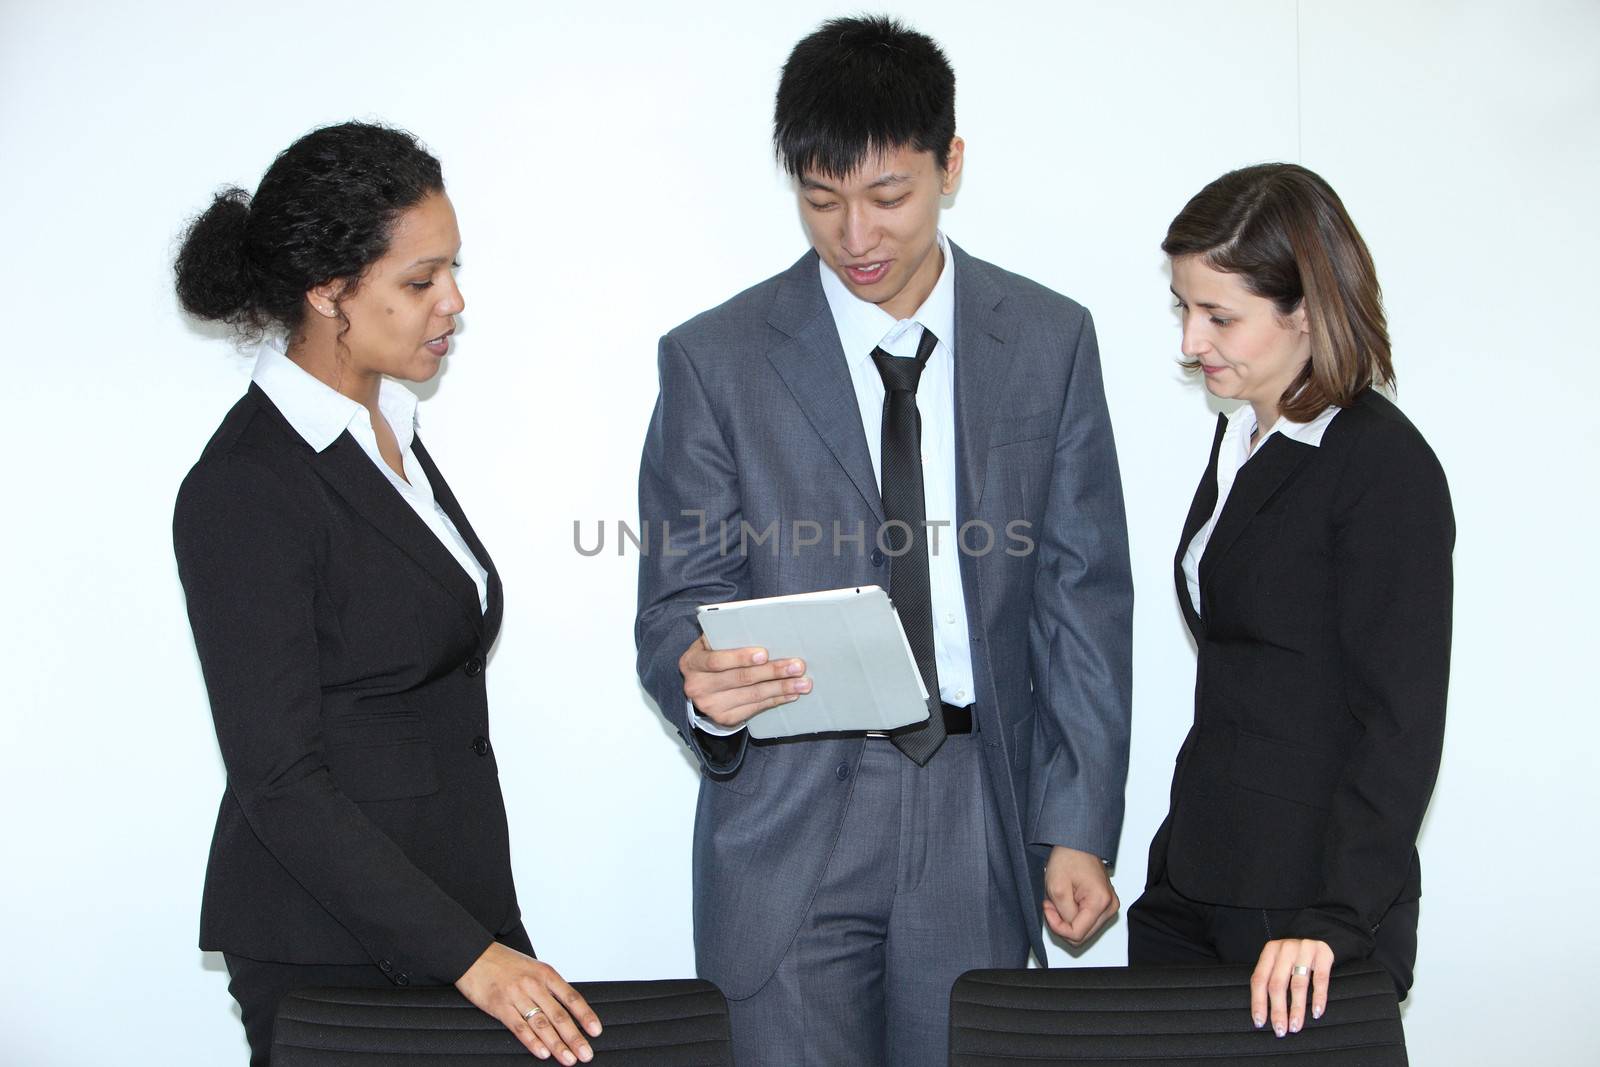 Multiethnic coworkers discussing a business problem standing together looking at a tablet held by a young Asian businessman